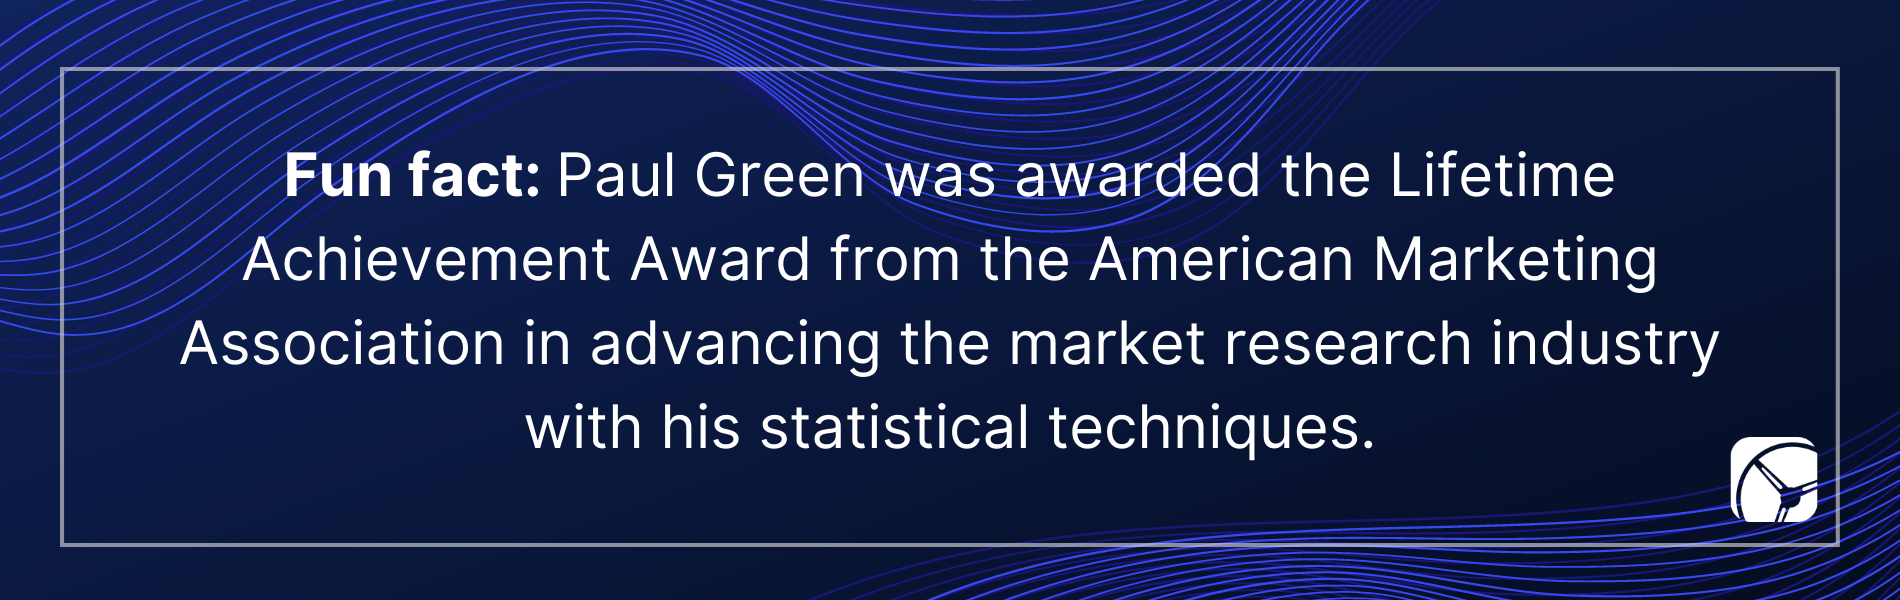 Fun fact: Paul Green was awarded the Lifetime Achievement Award from the American Marketing Association in advancing the market research industry with his statistical techniques.